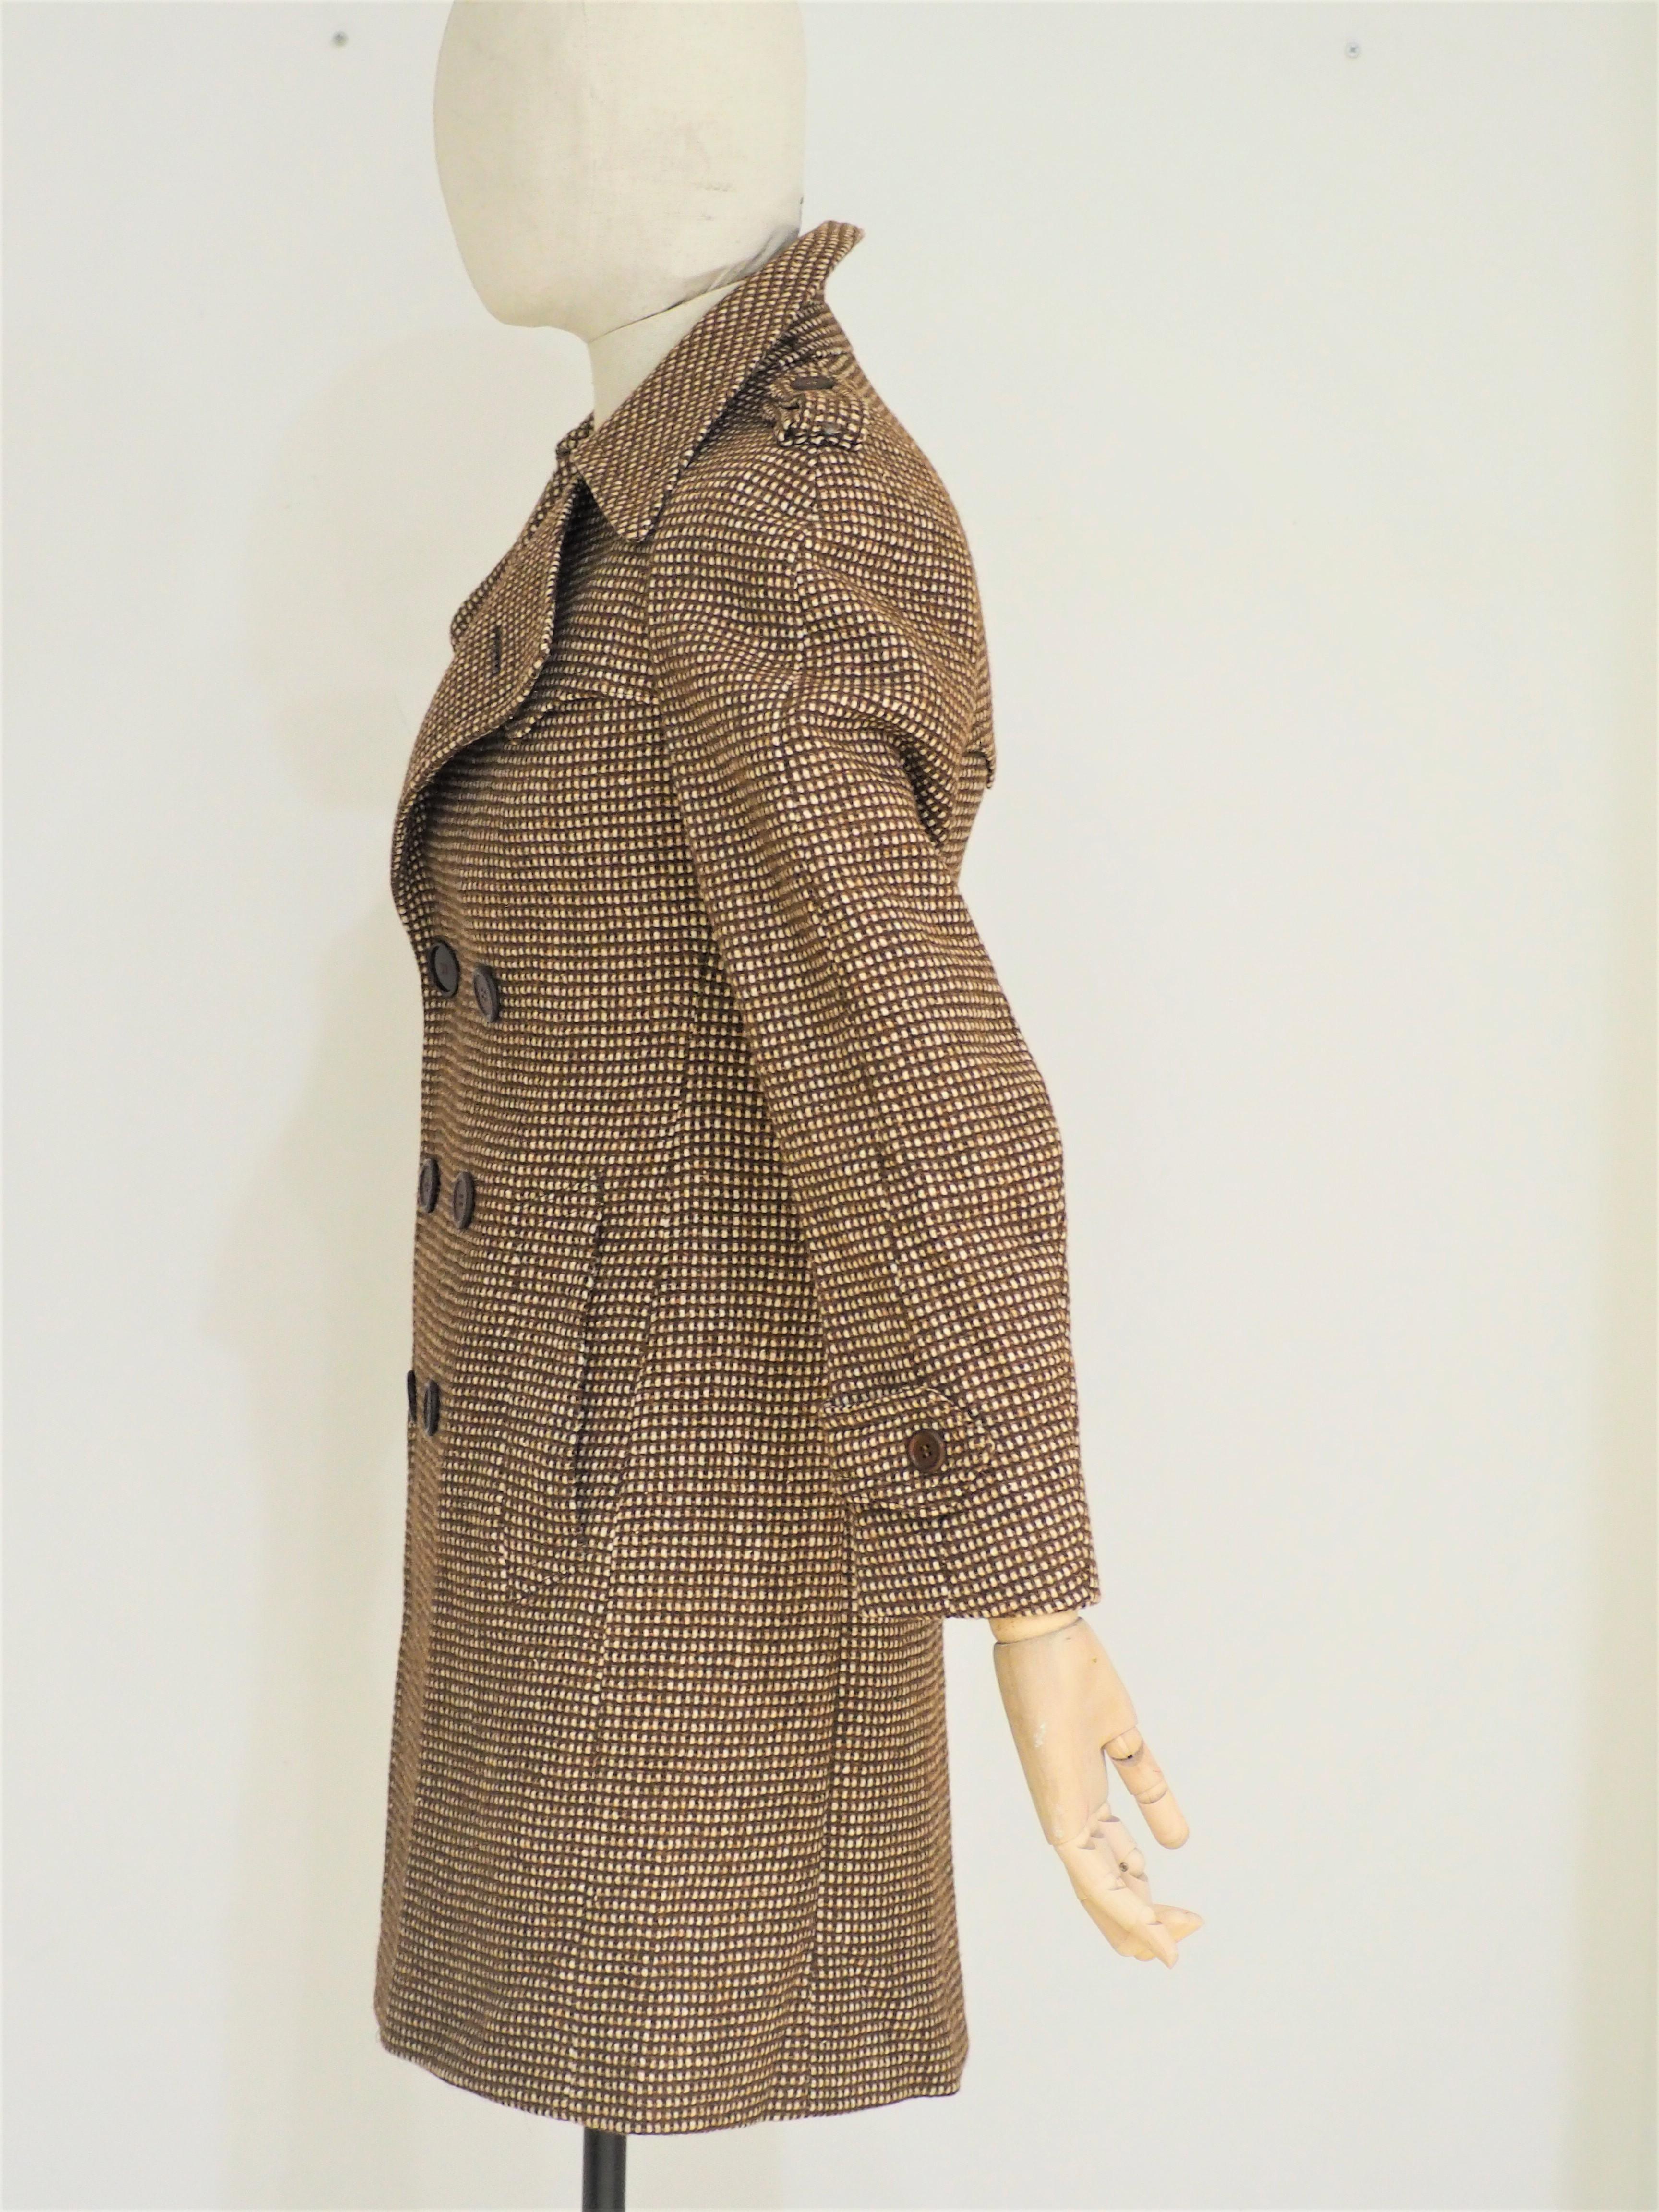 Brown Facis Ventalli coat
totally made in italy in size 48